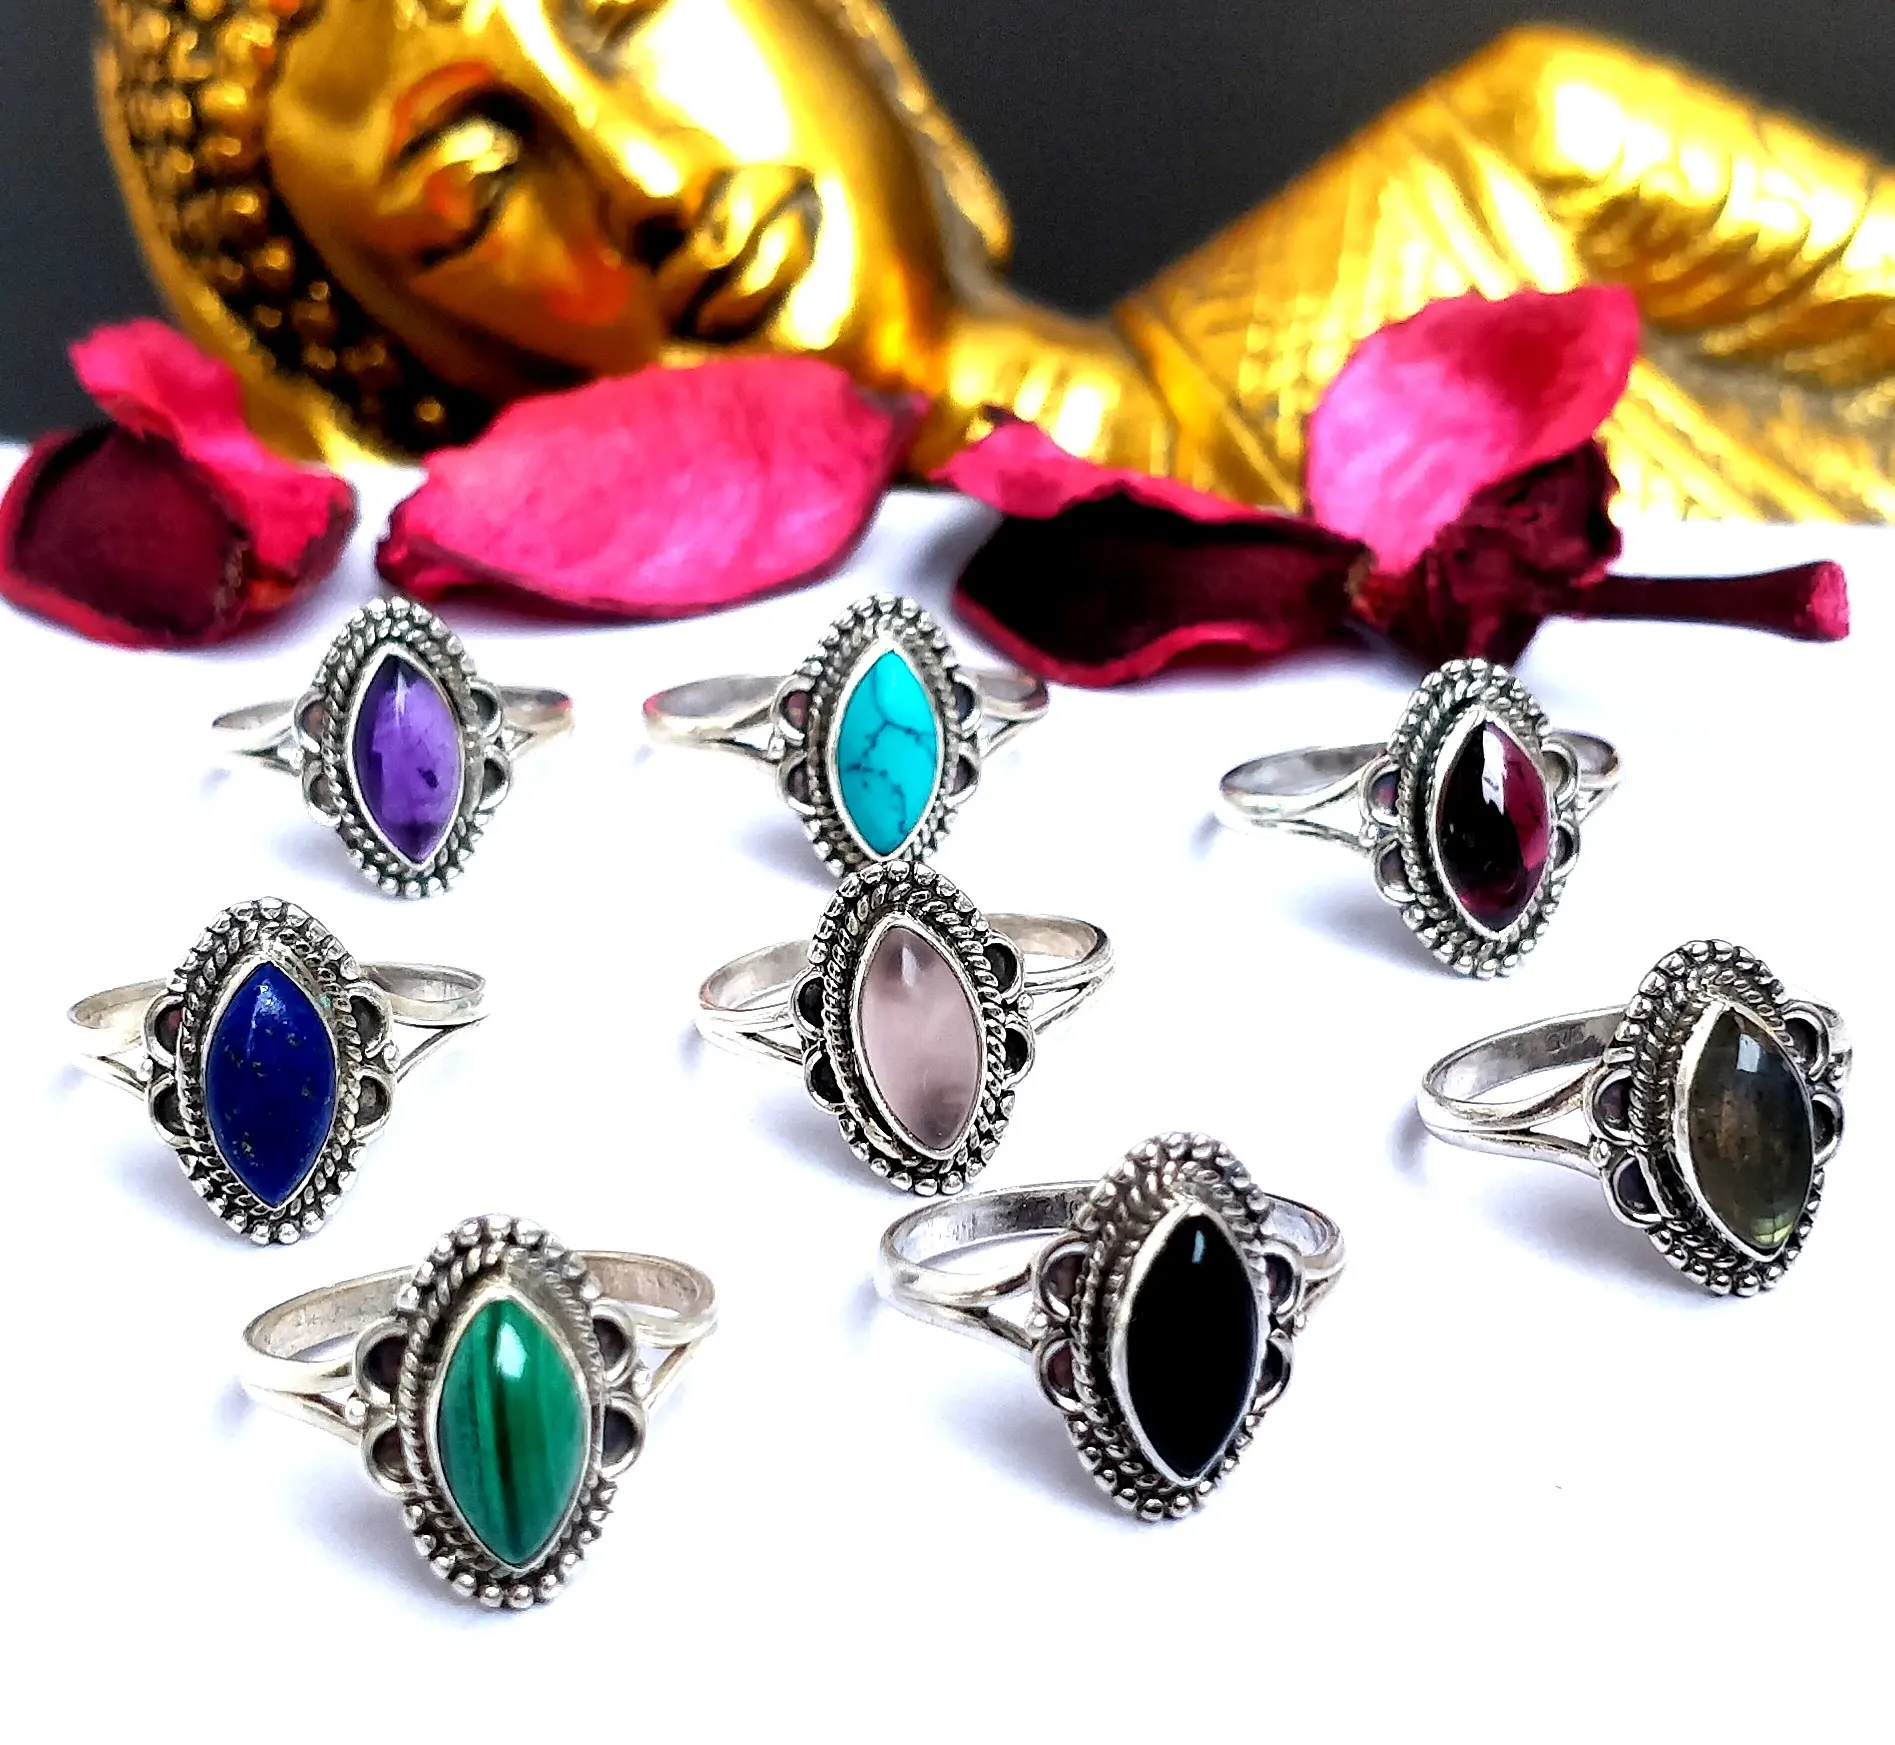 Beautiful Handmade Natural Semi-Precious Stone Silver 925 Gemstone Rings for Her - Wholesale Silver Jewelry Factory from India